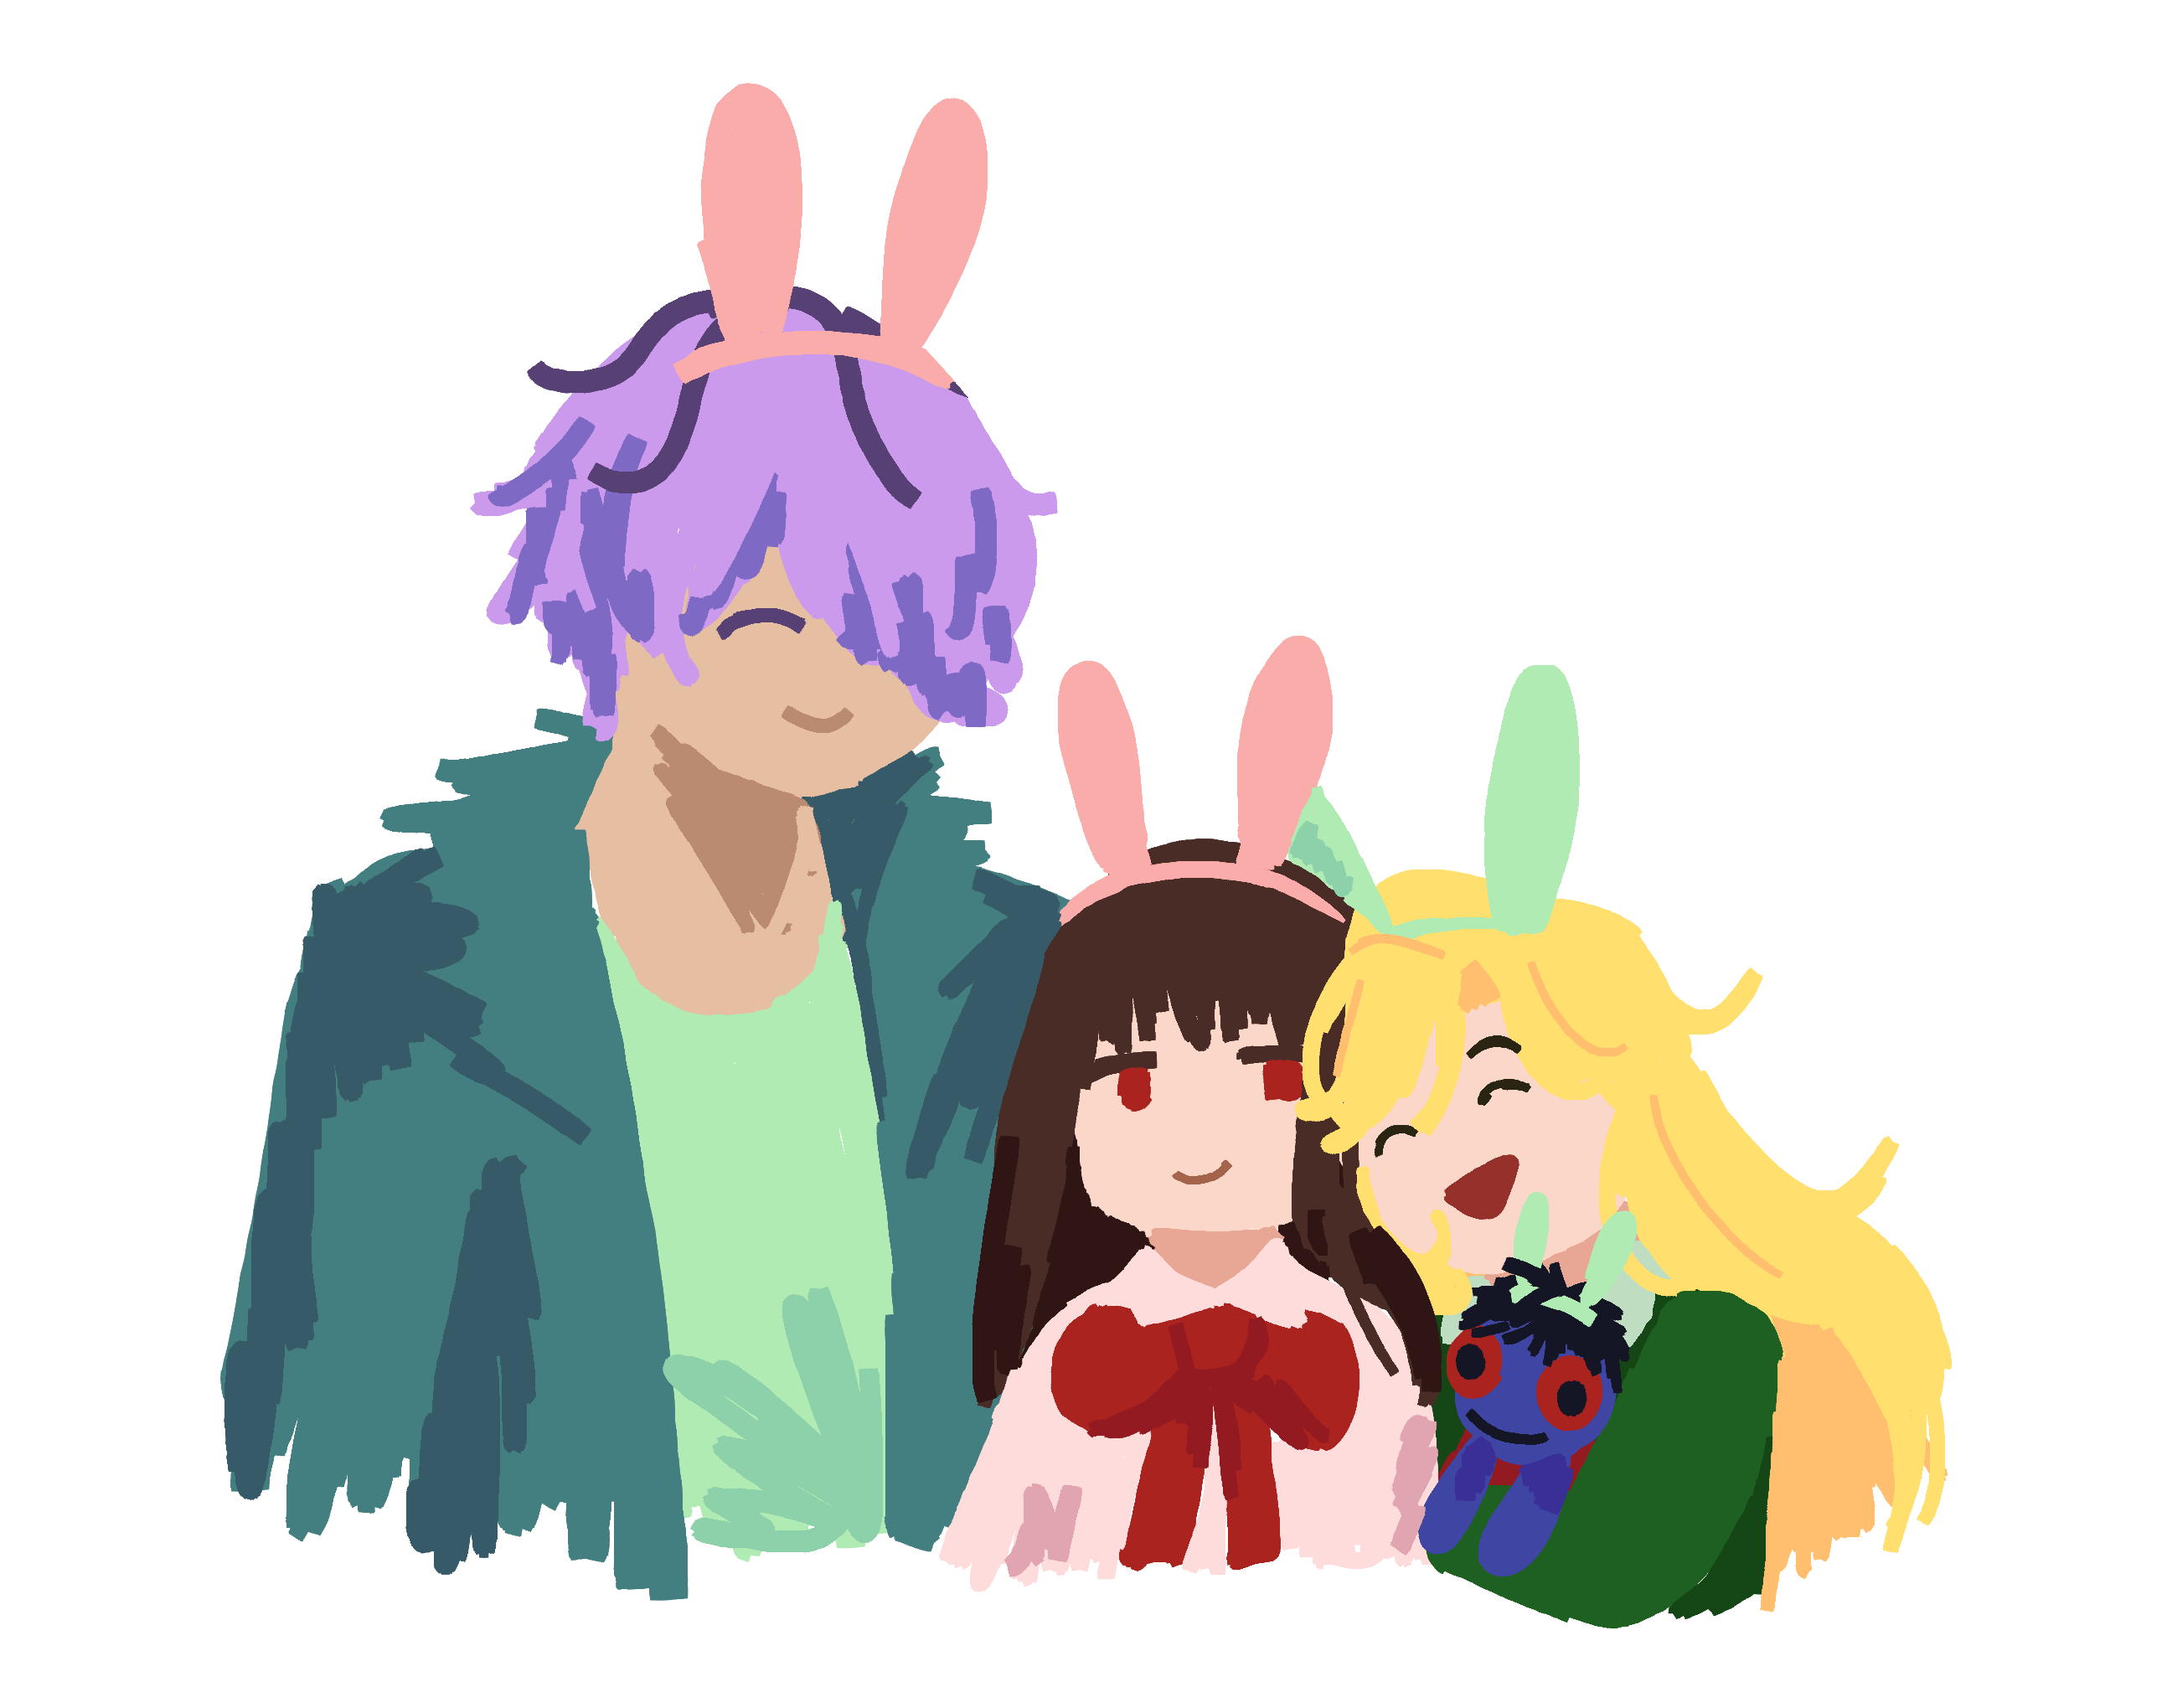 a blocky doodle on a white background of Garry, Ib, and Mary wearing bunny ears. Mary is holding a doll also wearing bunny ears. Everyone is smiling.